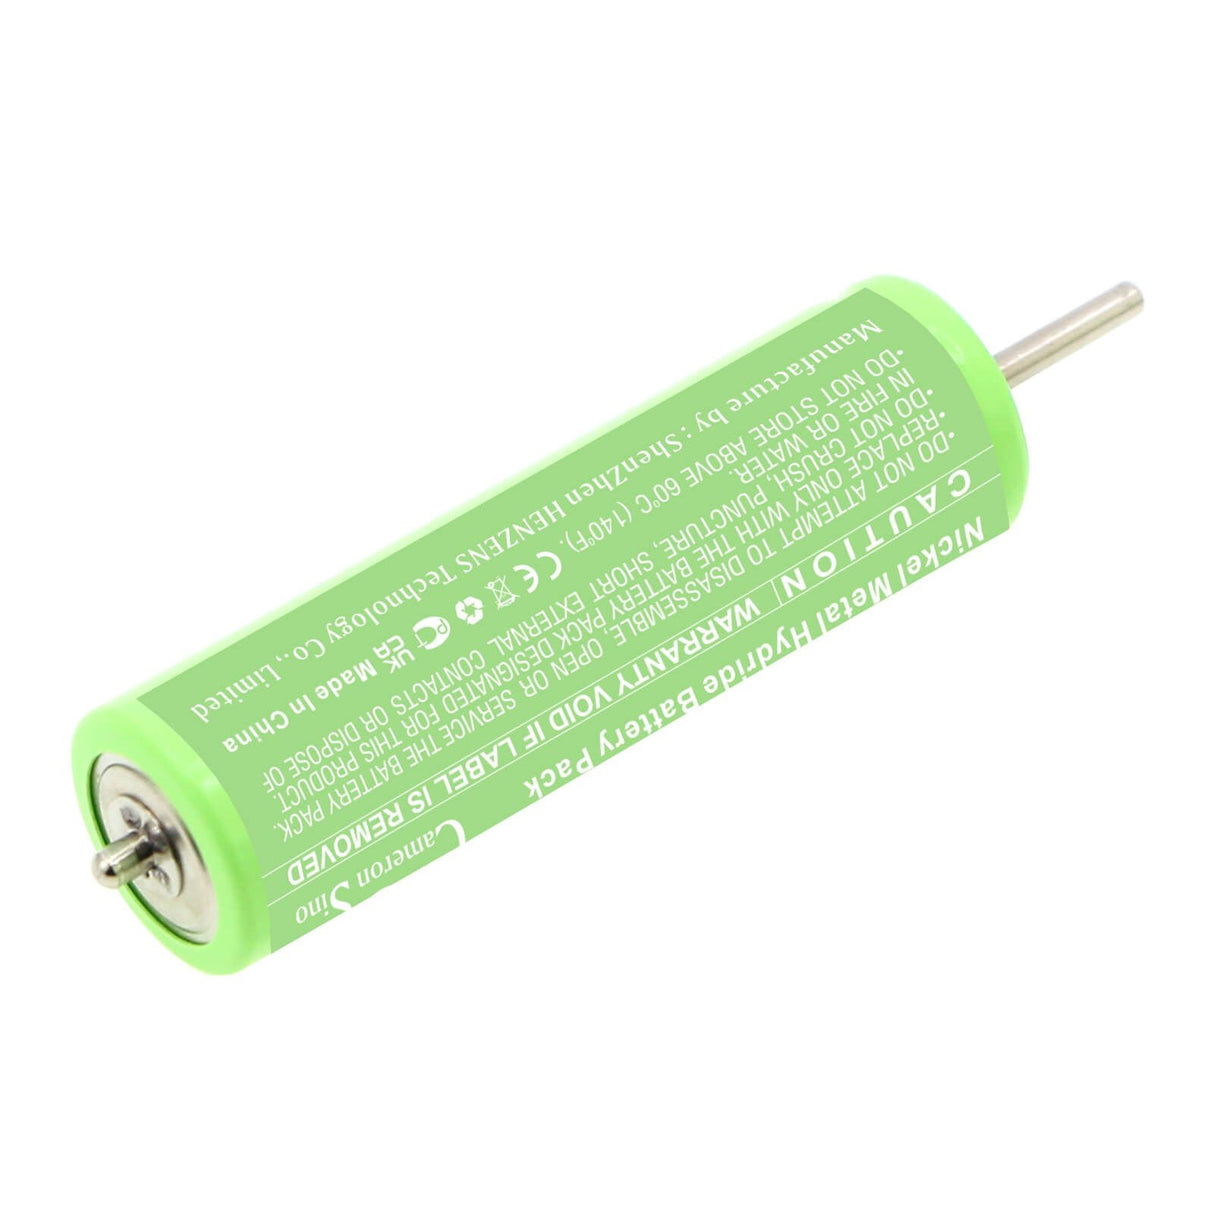 1.2v, Ni-mh, 2000mah, Battery Fits Panasonic Es2207p, Es3042, 2.40wh Batteries for Electronics Cameron Sino Technology Limited   